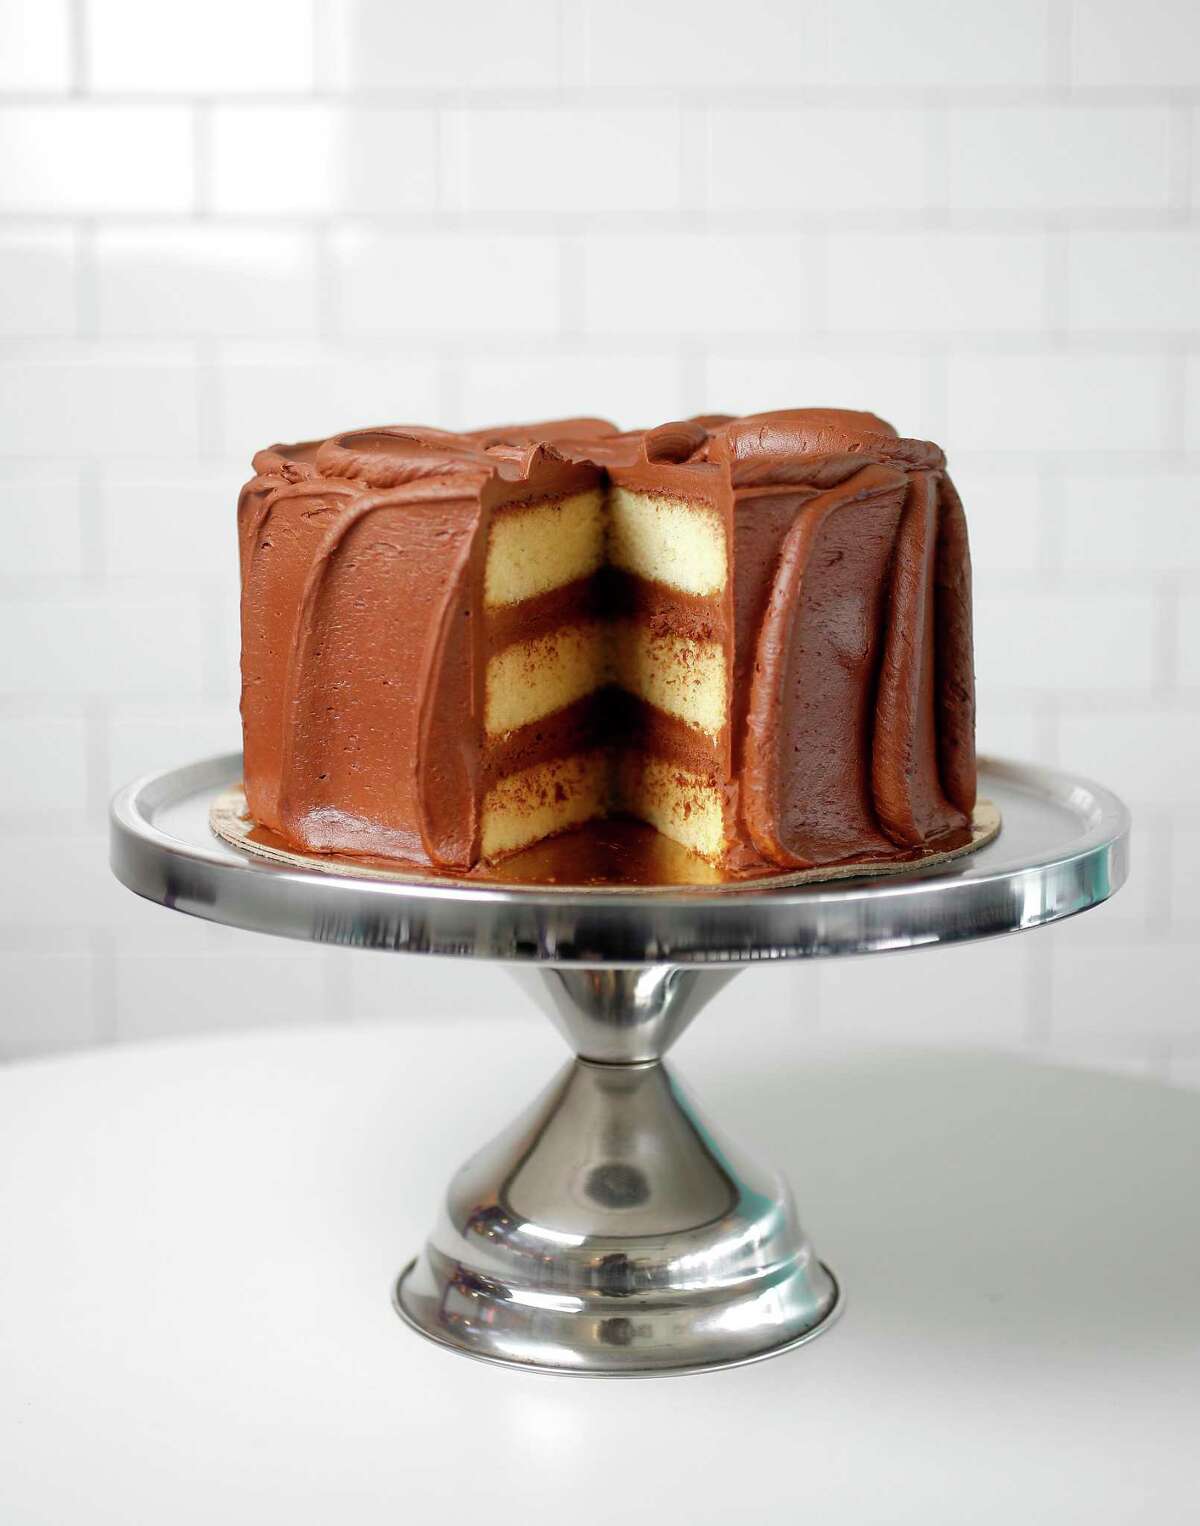 Diner Cake, a yellow cake with chocolate frosting, is the best-selling cake at Dessert Gallery.